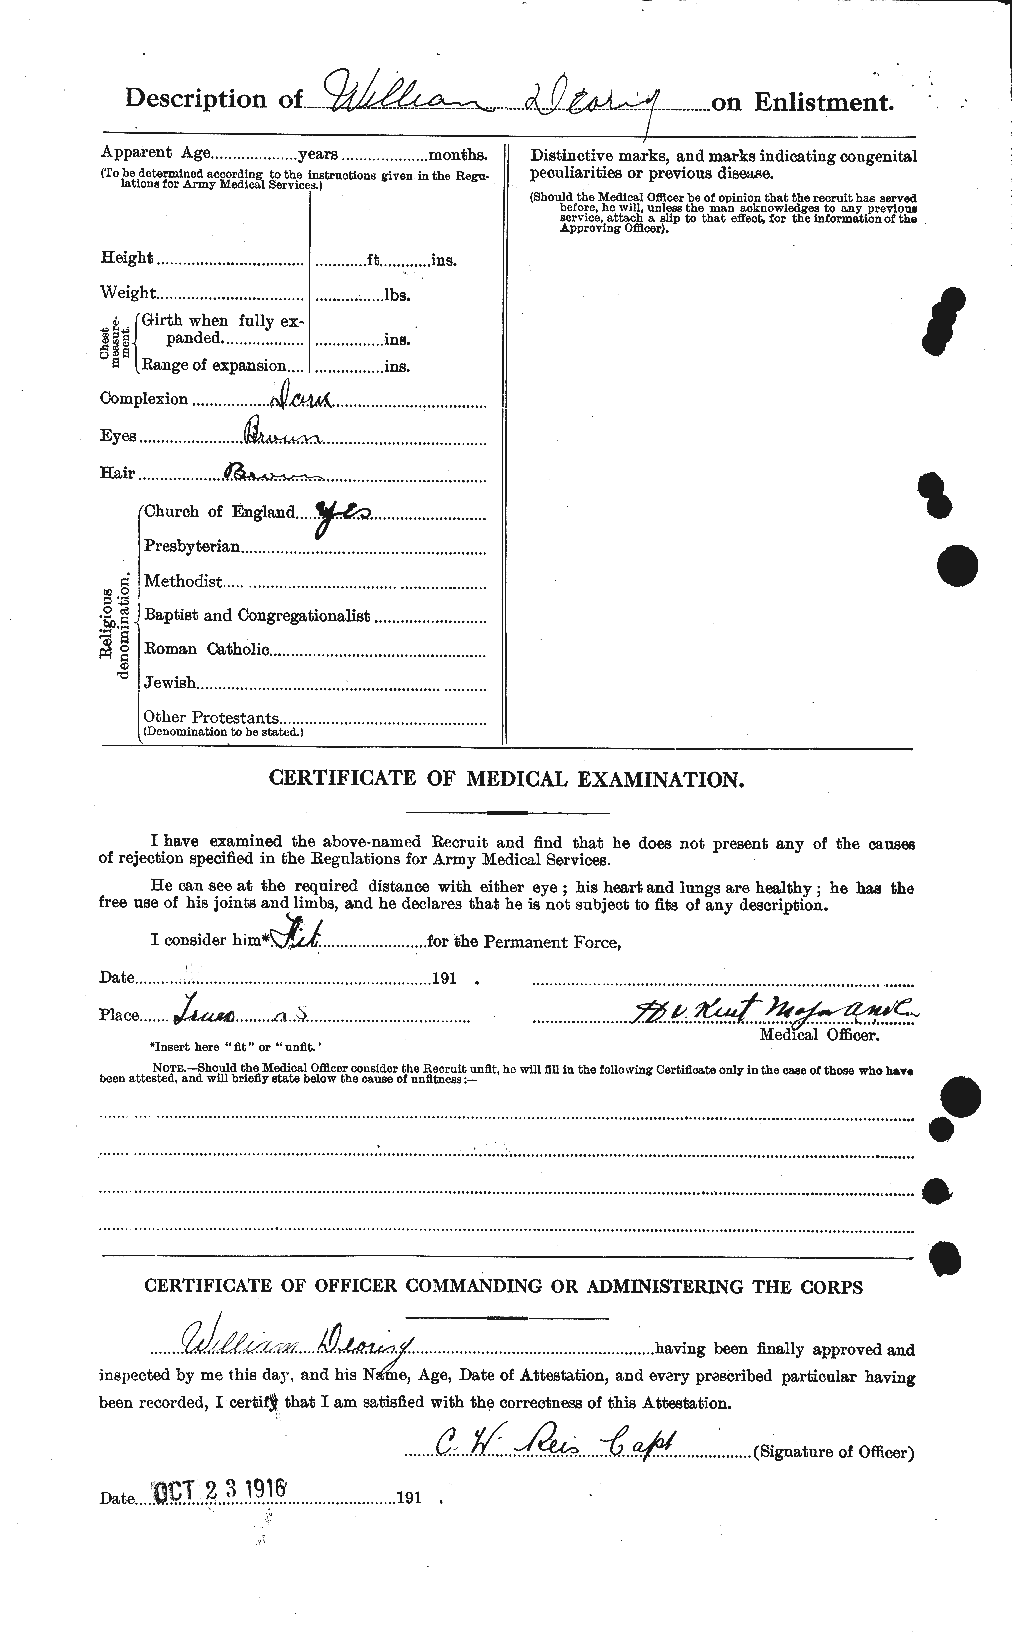 Personnel Records of the First World War - CEF 280108b